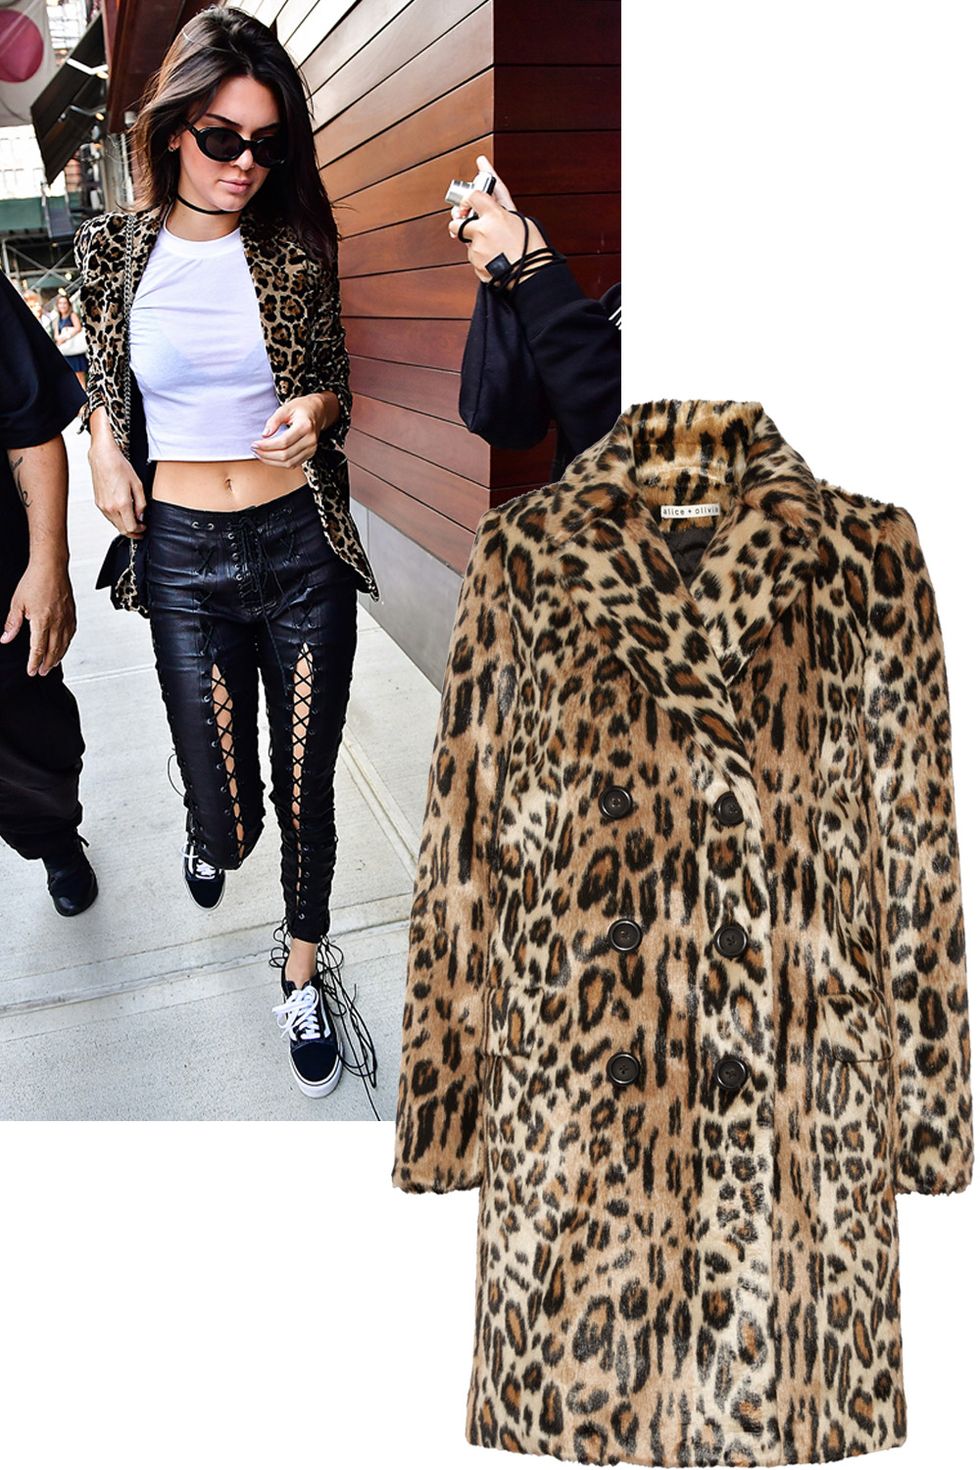 <p>Who: Kendall Jenner</p><p>What: Leather pants, trainers and a little leopard lend you and your aura a little edge.</p><p><em data-redactor-tag="em" data-verified="redactor">Alice&nbsp;+ Olivia jacket, $595, <a href="https://www.aliceandolivia.com/montana-doublebreasted-peacoat.html" target="_blank">aliceandolivia.com</a><span class="redactor-invisible-space" data-verified="redactor" data-redactor-tag="span" data-redactor-class="redactor-invisible-space"><a href="https://www.aliceandolivia.com/montana-doublebreasted-peacoat.html"></a></span>.&nbsp;</em></p>